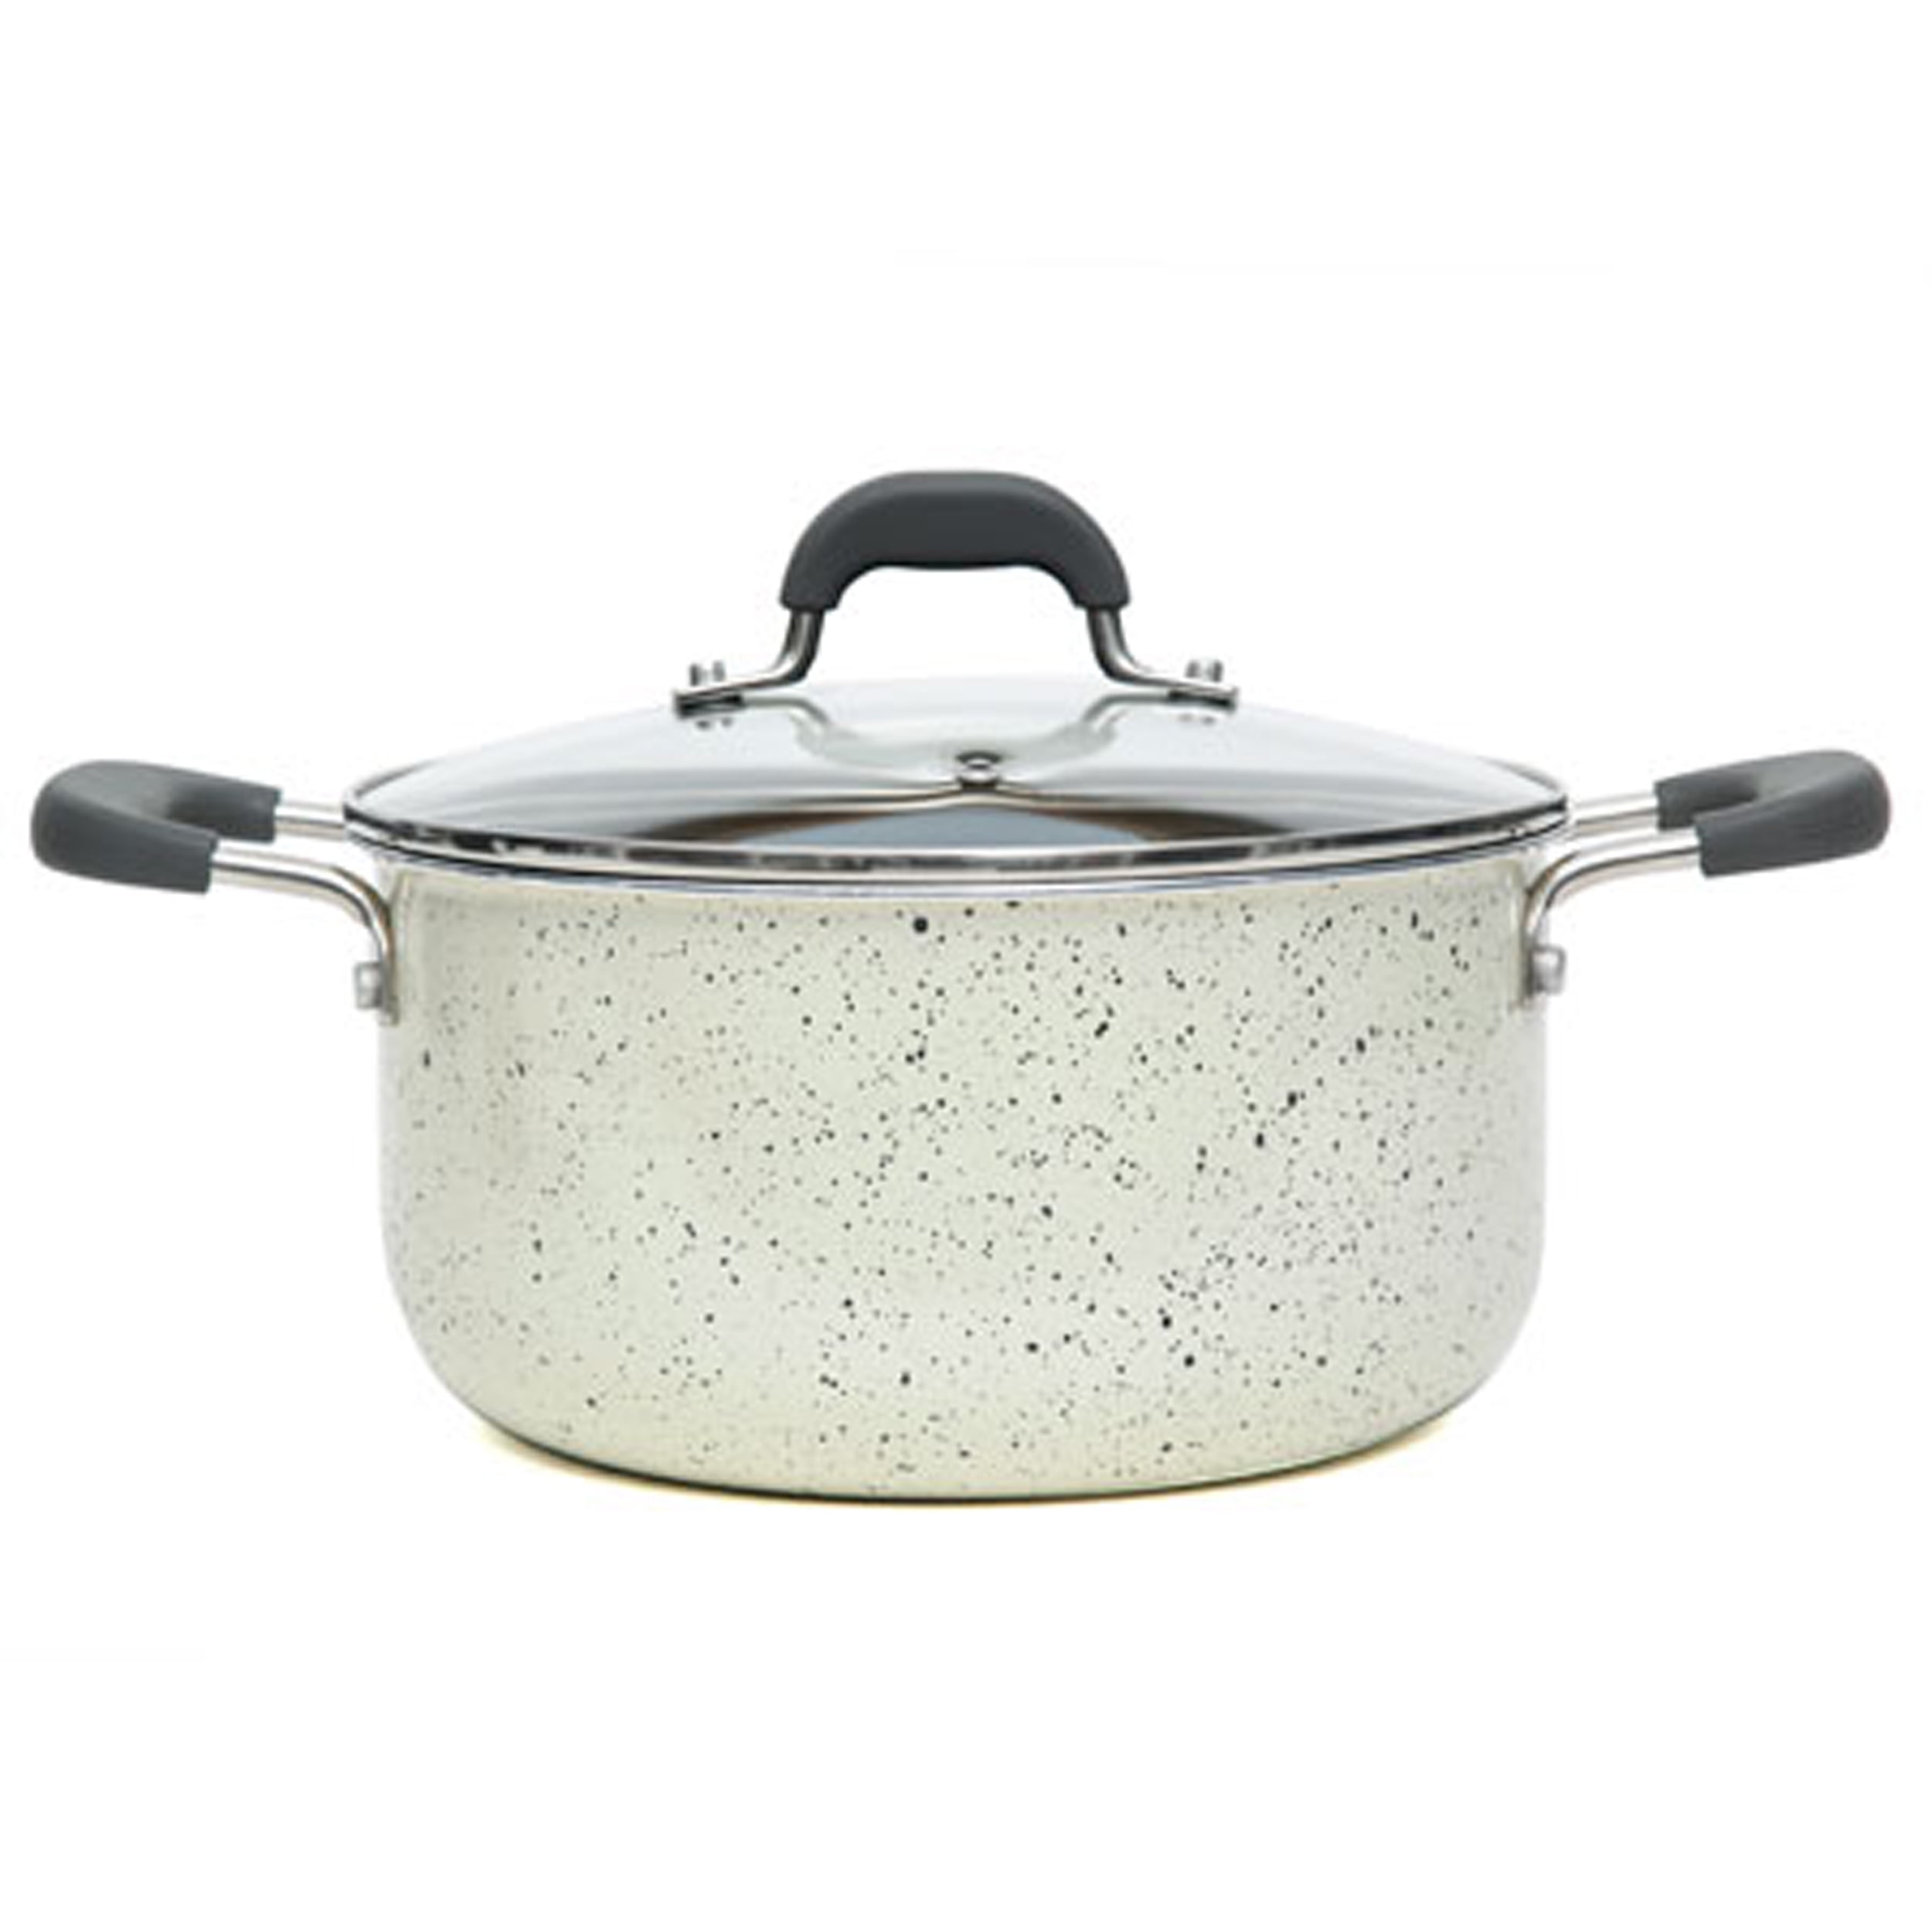 Pioneer Woman Vintage Speckle Nonstick (Walmart Exclusive) Cookware Review  - Consumer Reports